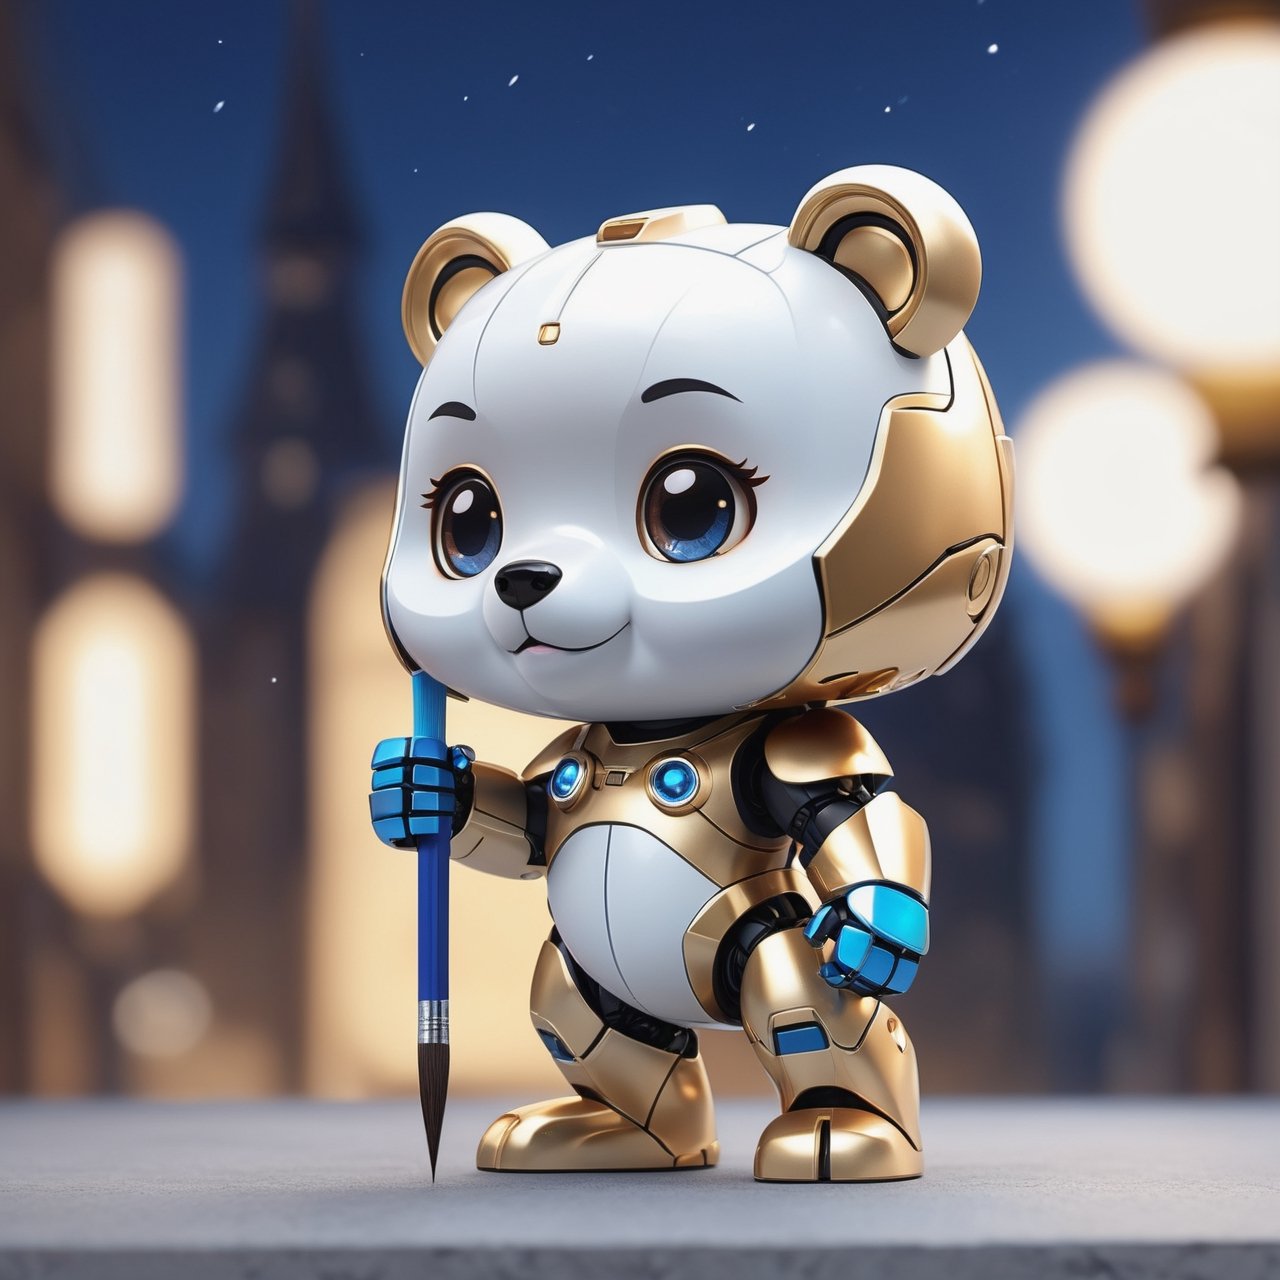 (masterpiece:1.2, highest quality), (realistic, photo_realistic:1.9)
1chibi_robot, Cute chibi robot, Designer look holding a paintbrush in one hand, white with blue, (detailed background), (gradients), colorful, detailed landscape, visual key, shiny skin. Modern place, Action camera. Portrait film. Standard lens. Golden hour lighting.
sharp focus, 8k, UHD, high quality, frowning, intricate detailed, highly detailed, hyper-realistic,interior,bear Chibi,chibi emote style